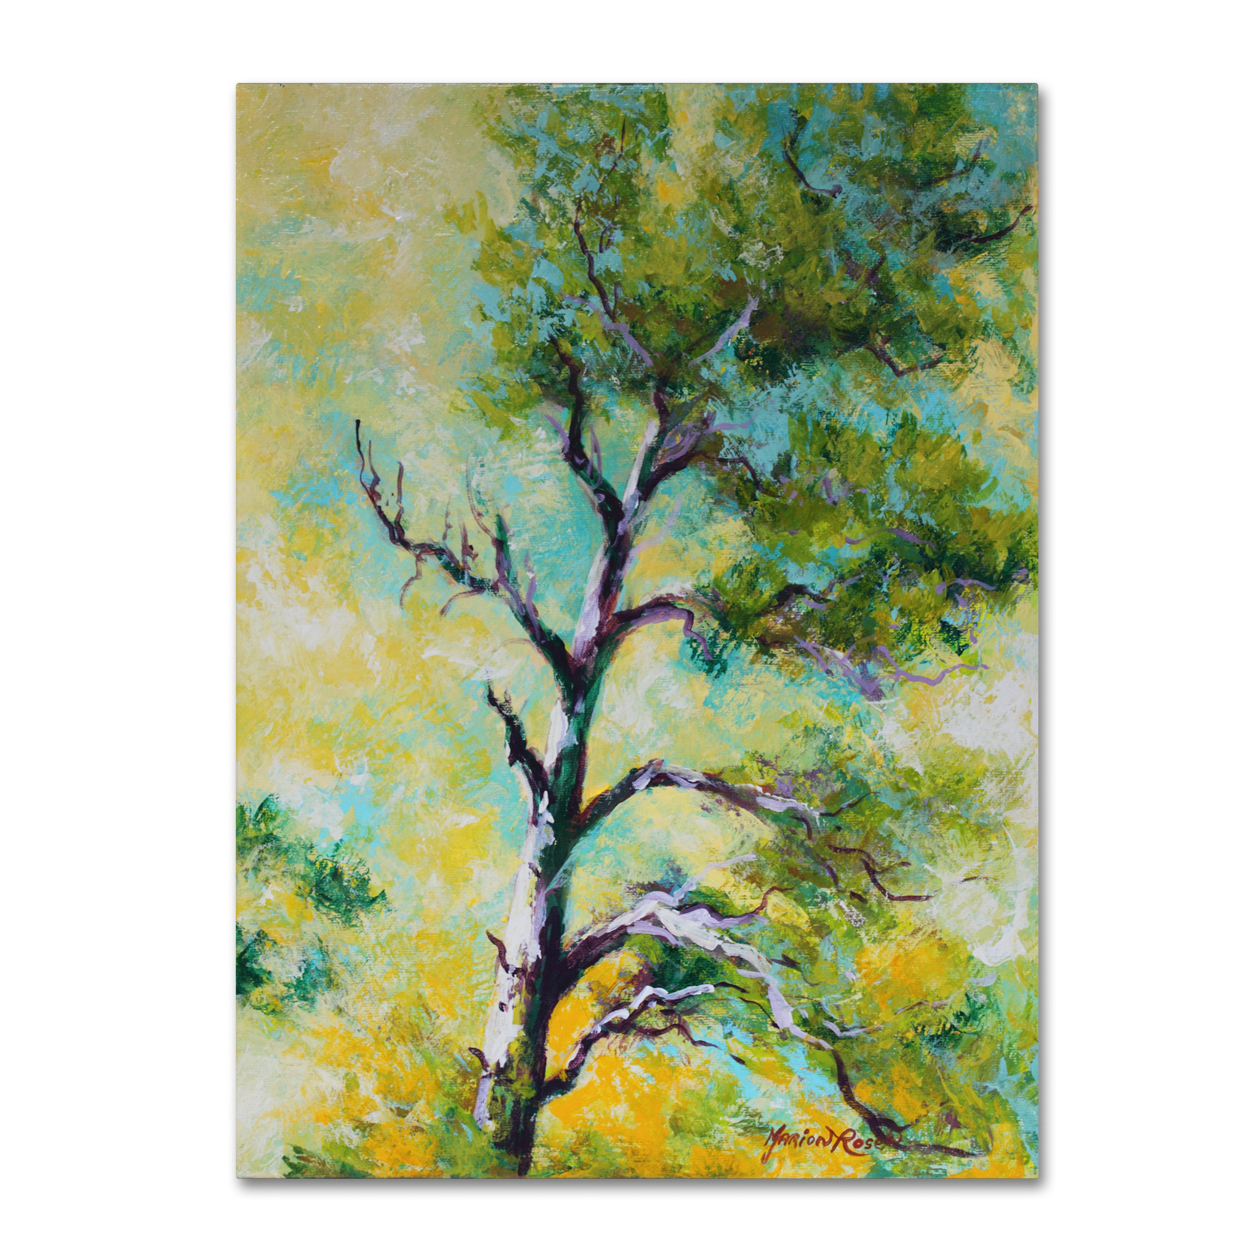 Marion Rose 'Pine Abstract' Ready To Hang Canvas Art 18 X 24 Inches Made In USA